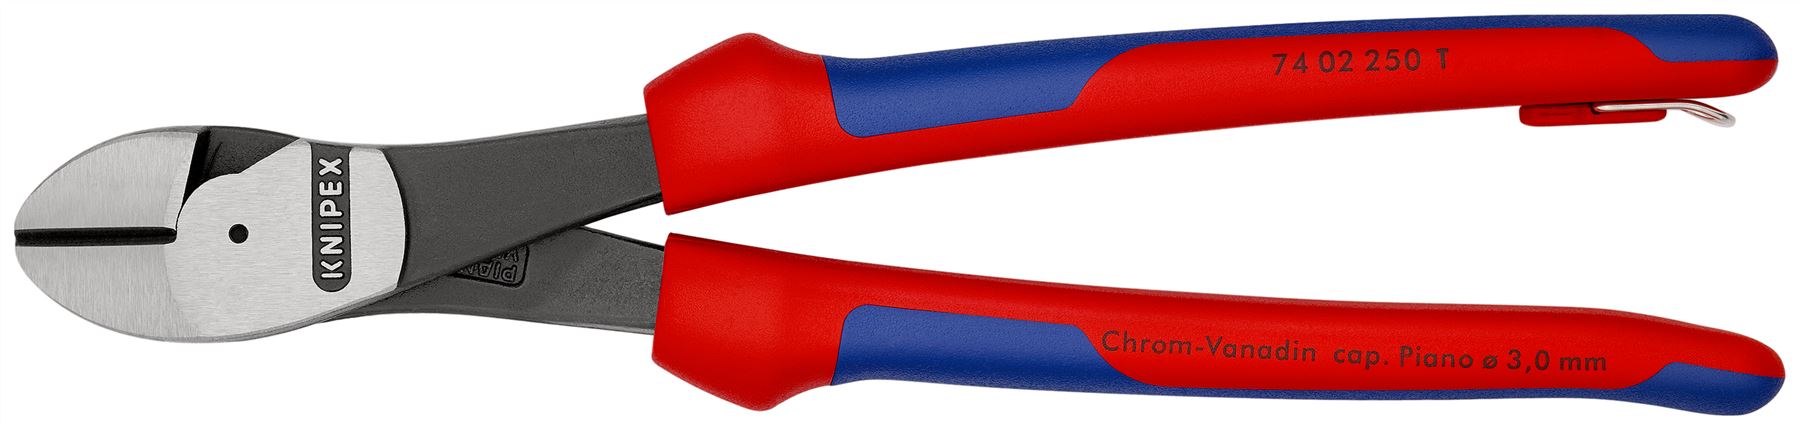 Knipex High Leverage Diagonal Cutter 250mm Multi Component Grips with Tether Point 74 02 250 T